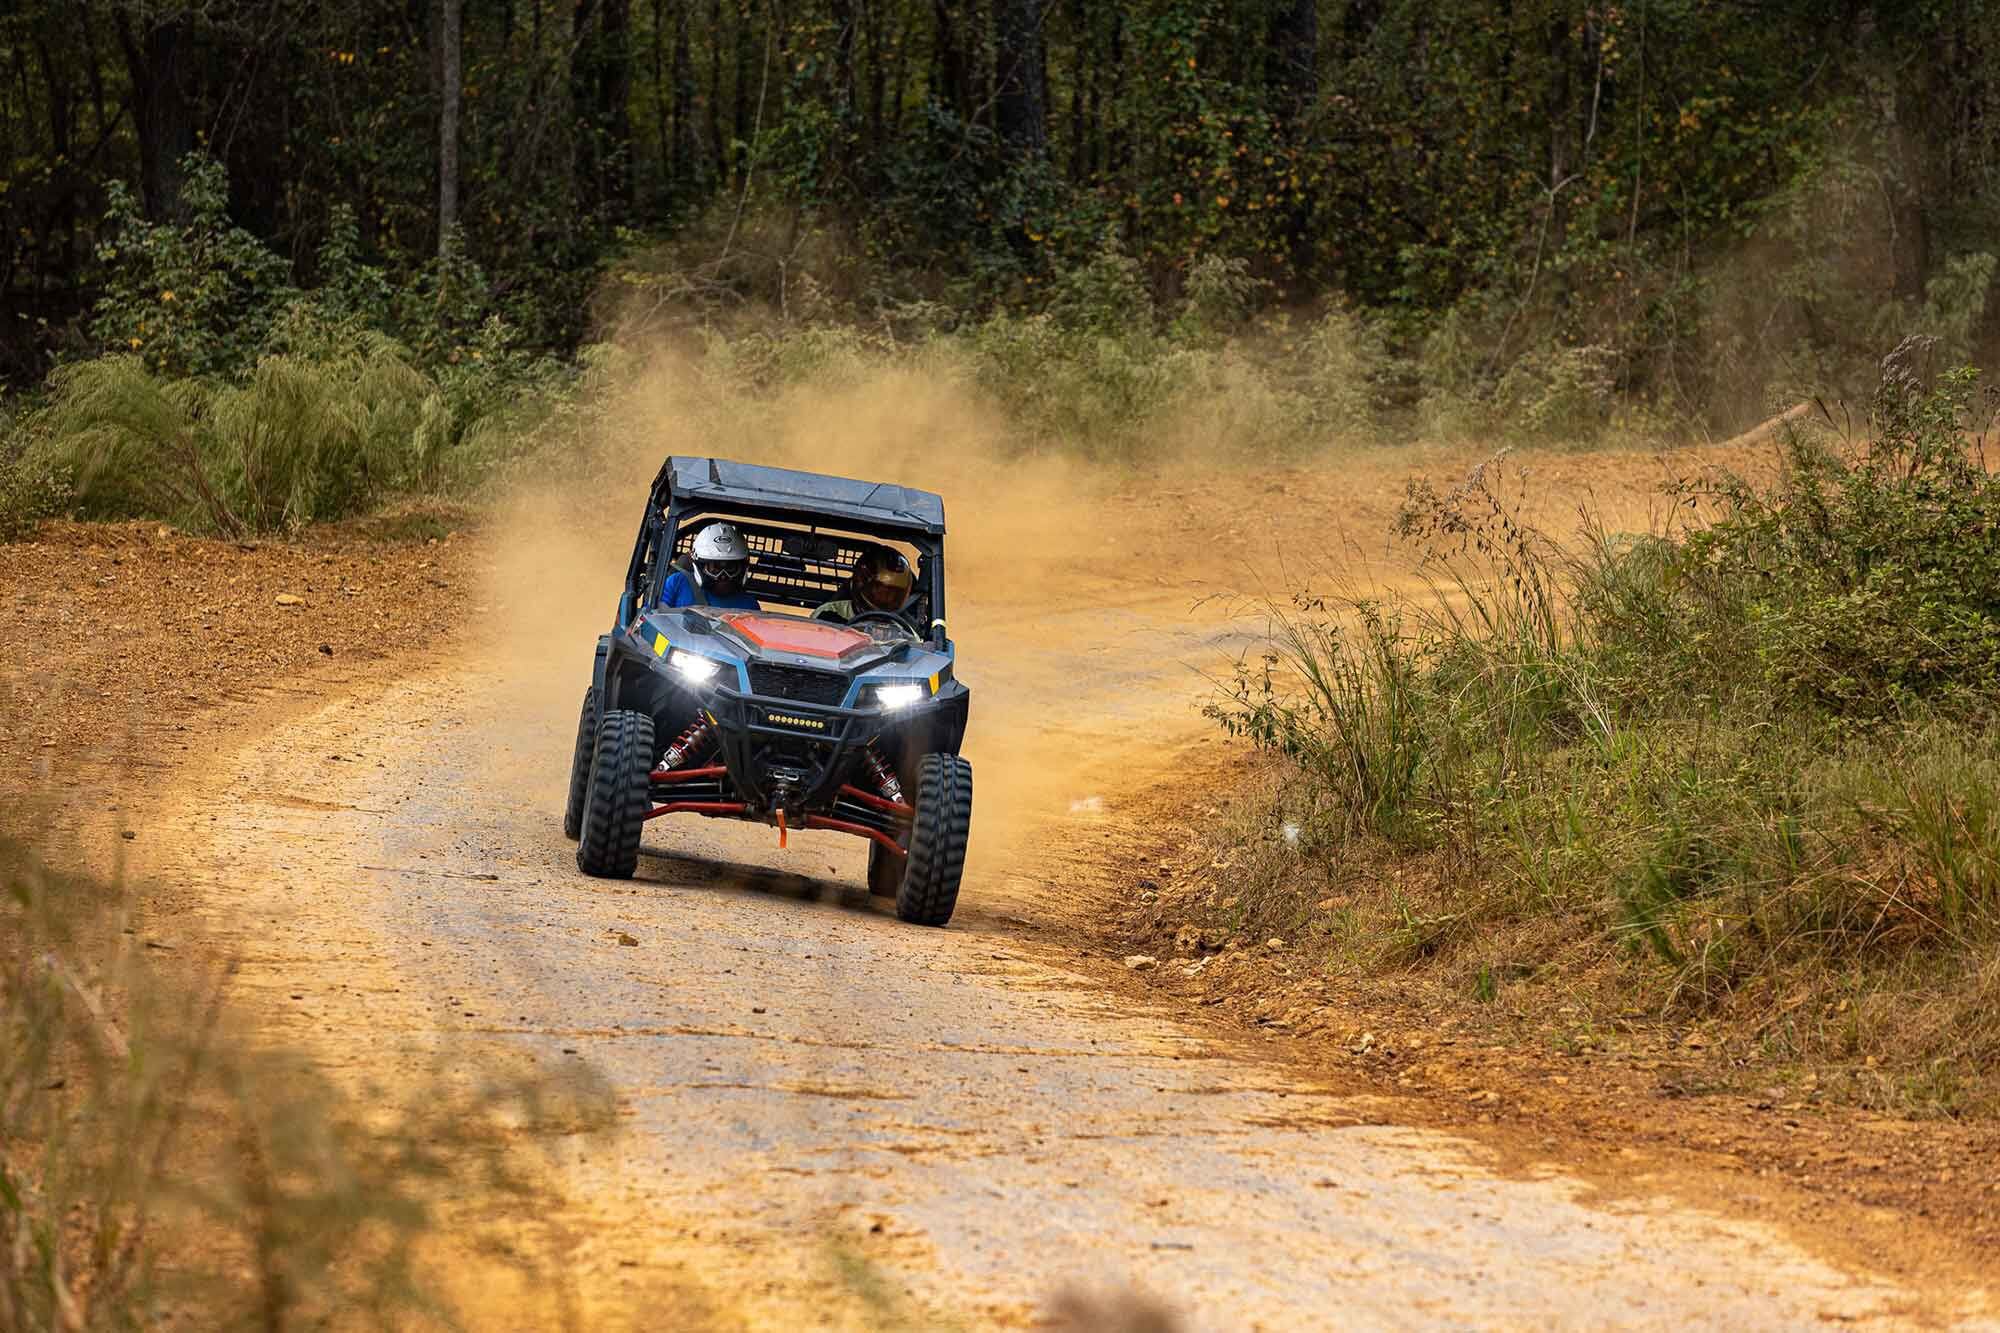 Durhamtown Off Road Resort’s wide, flowing tracks and trails proved to be happy hunting grounds for the General.